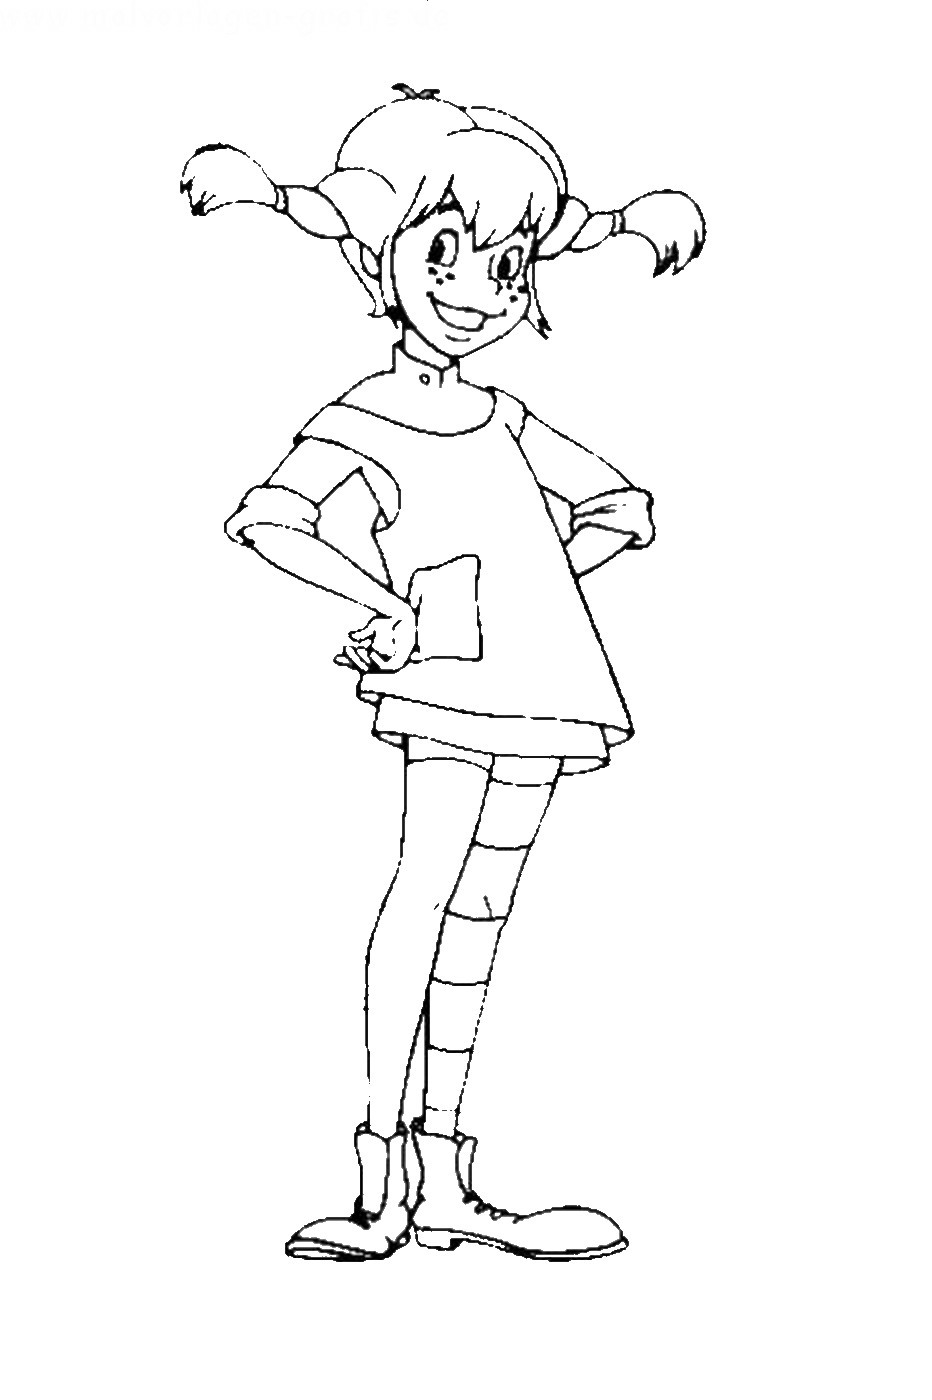 Pippi Longstocking Coloring Pages